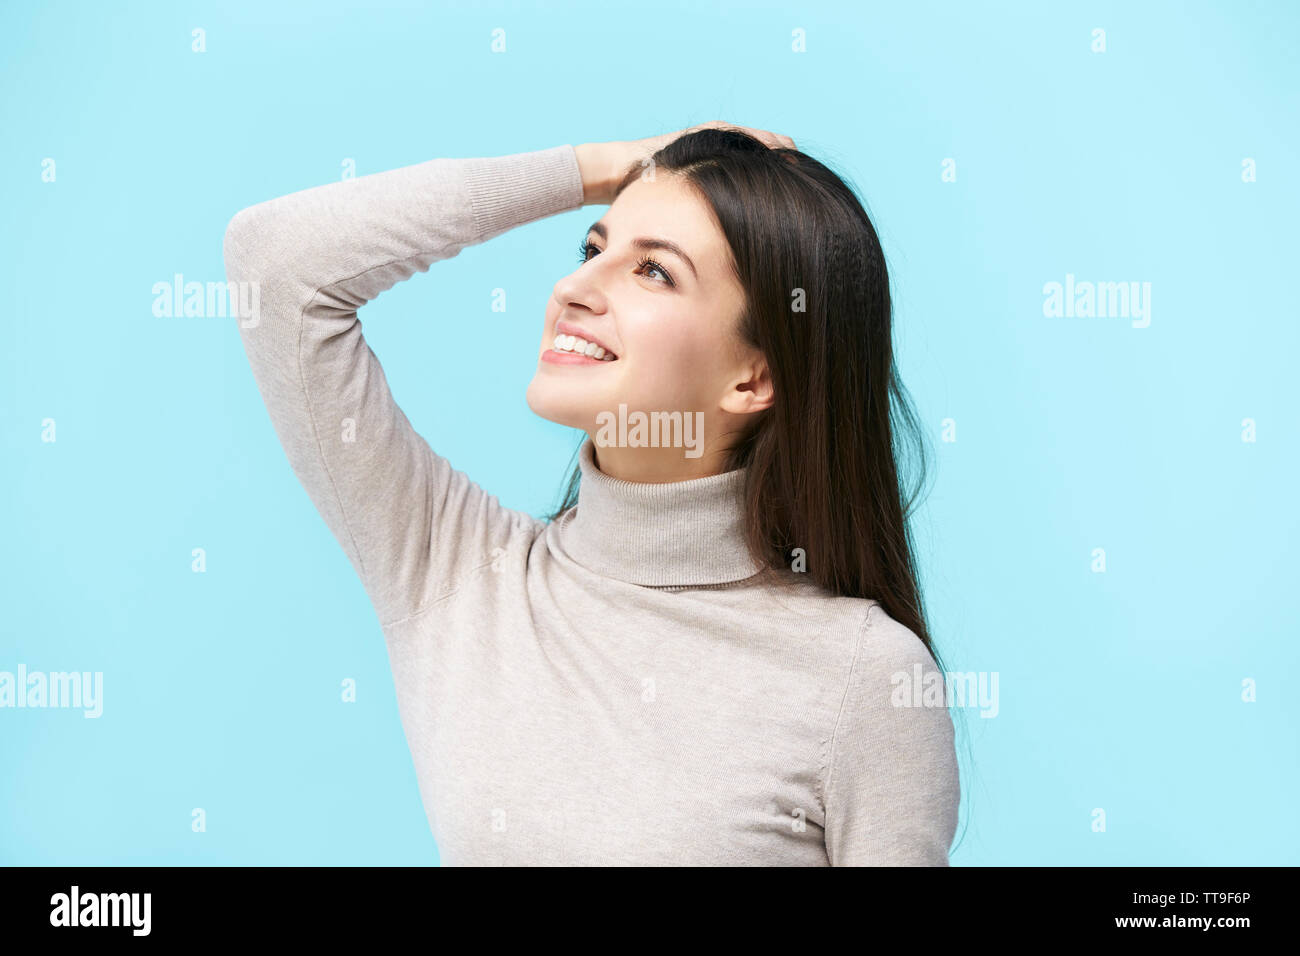 beautiful young caucasian woman looking up and smiling, hand on forehead, isolated on blue background Stock Photo